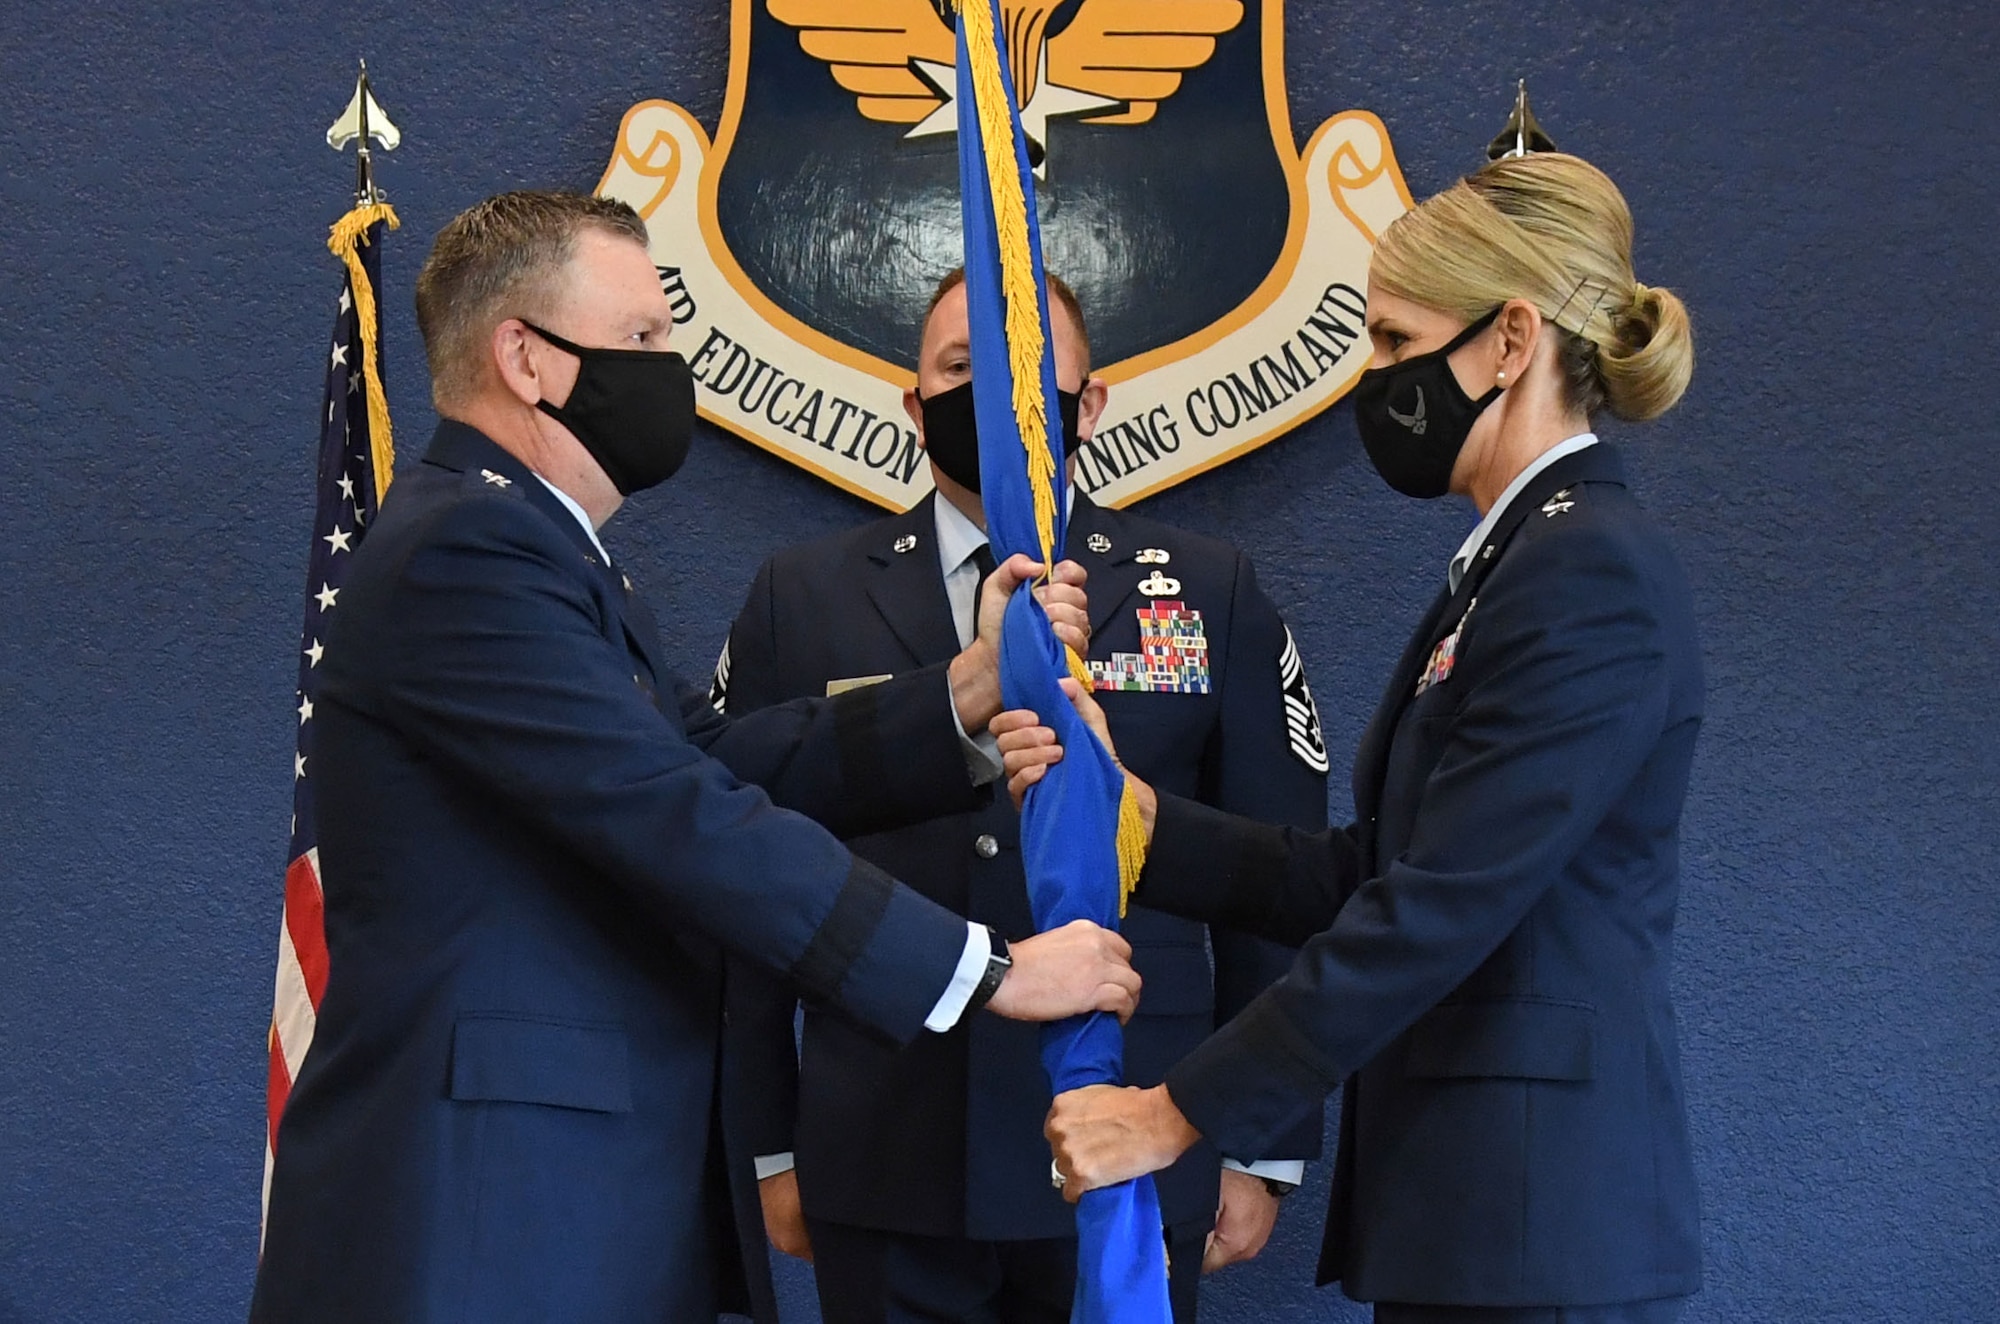 U.S. Air Force Lt. Gen. Brad Webb, commander of Air Education and Training Command, presents the guidon to Maj. Gen. Michele Edmondson, Second Air Force commander, during the Second Air Force change of command ceremony inside the Bay Breeze Event Center at Keesler Air Force Base, Mississippi, July 30, 2021. The ceremony is a symbol of command being exchanged from one commander to the next. Edmondson took command of the Second Air Force from Maj. Gen. Andrea Tullos. (U.S. Air Force photo by Kemberly Groue)